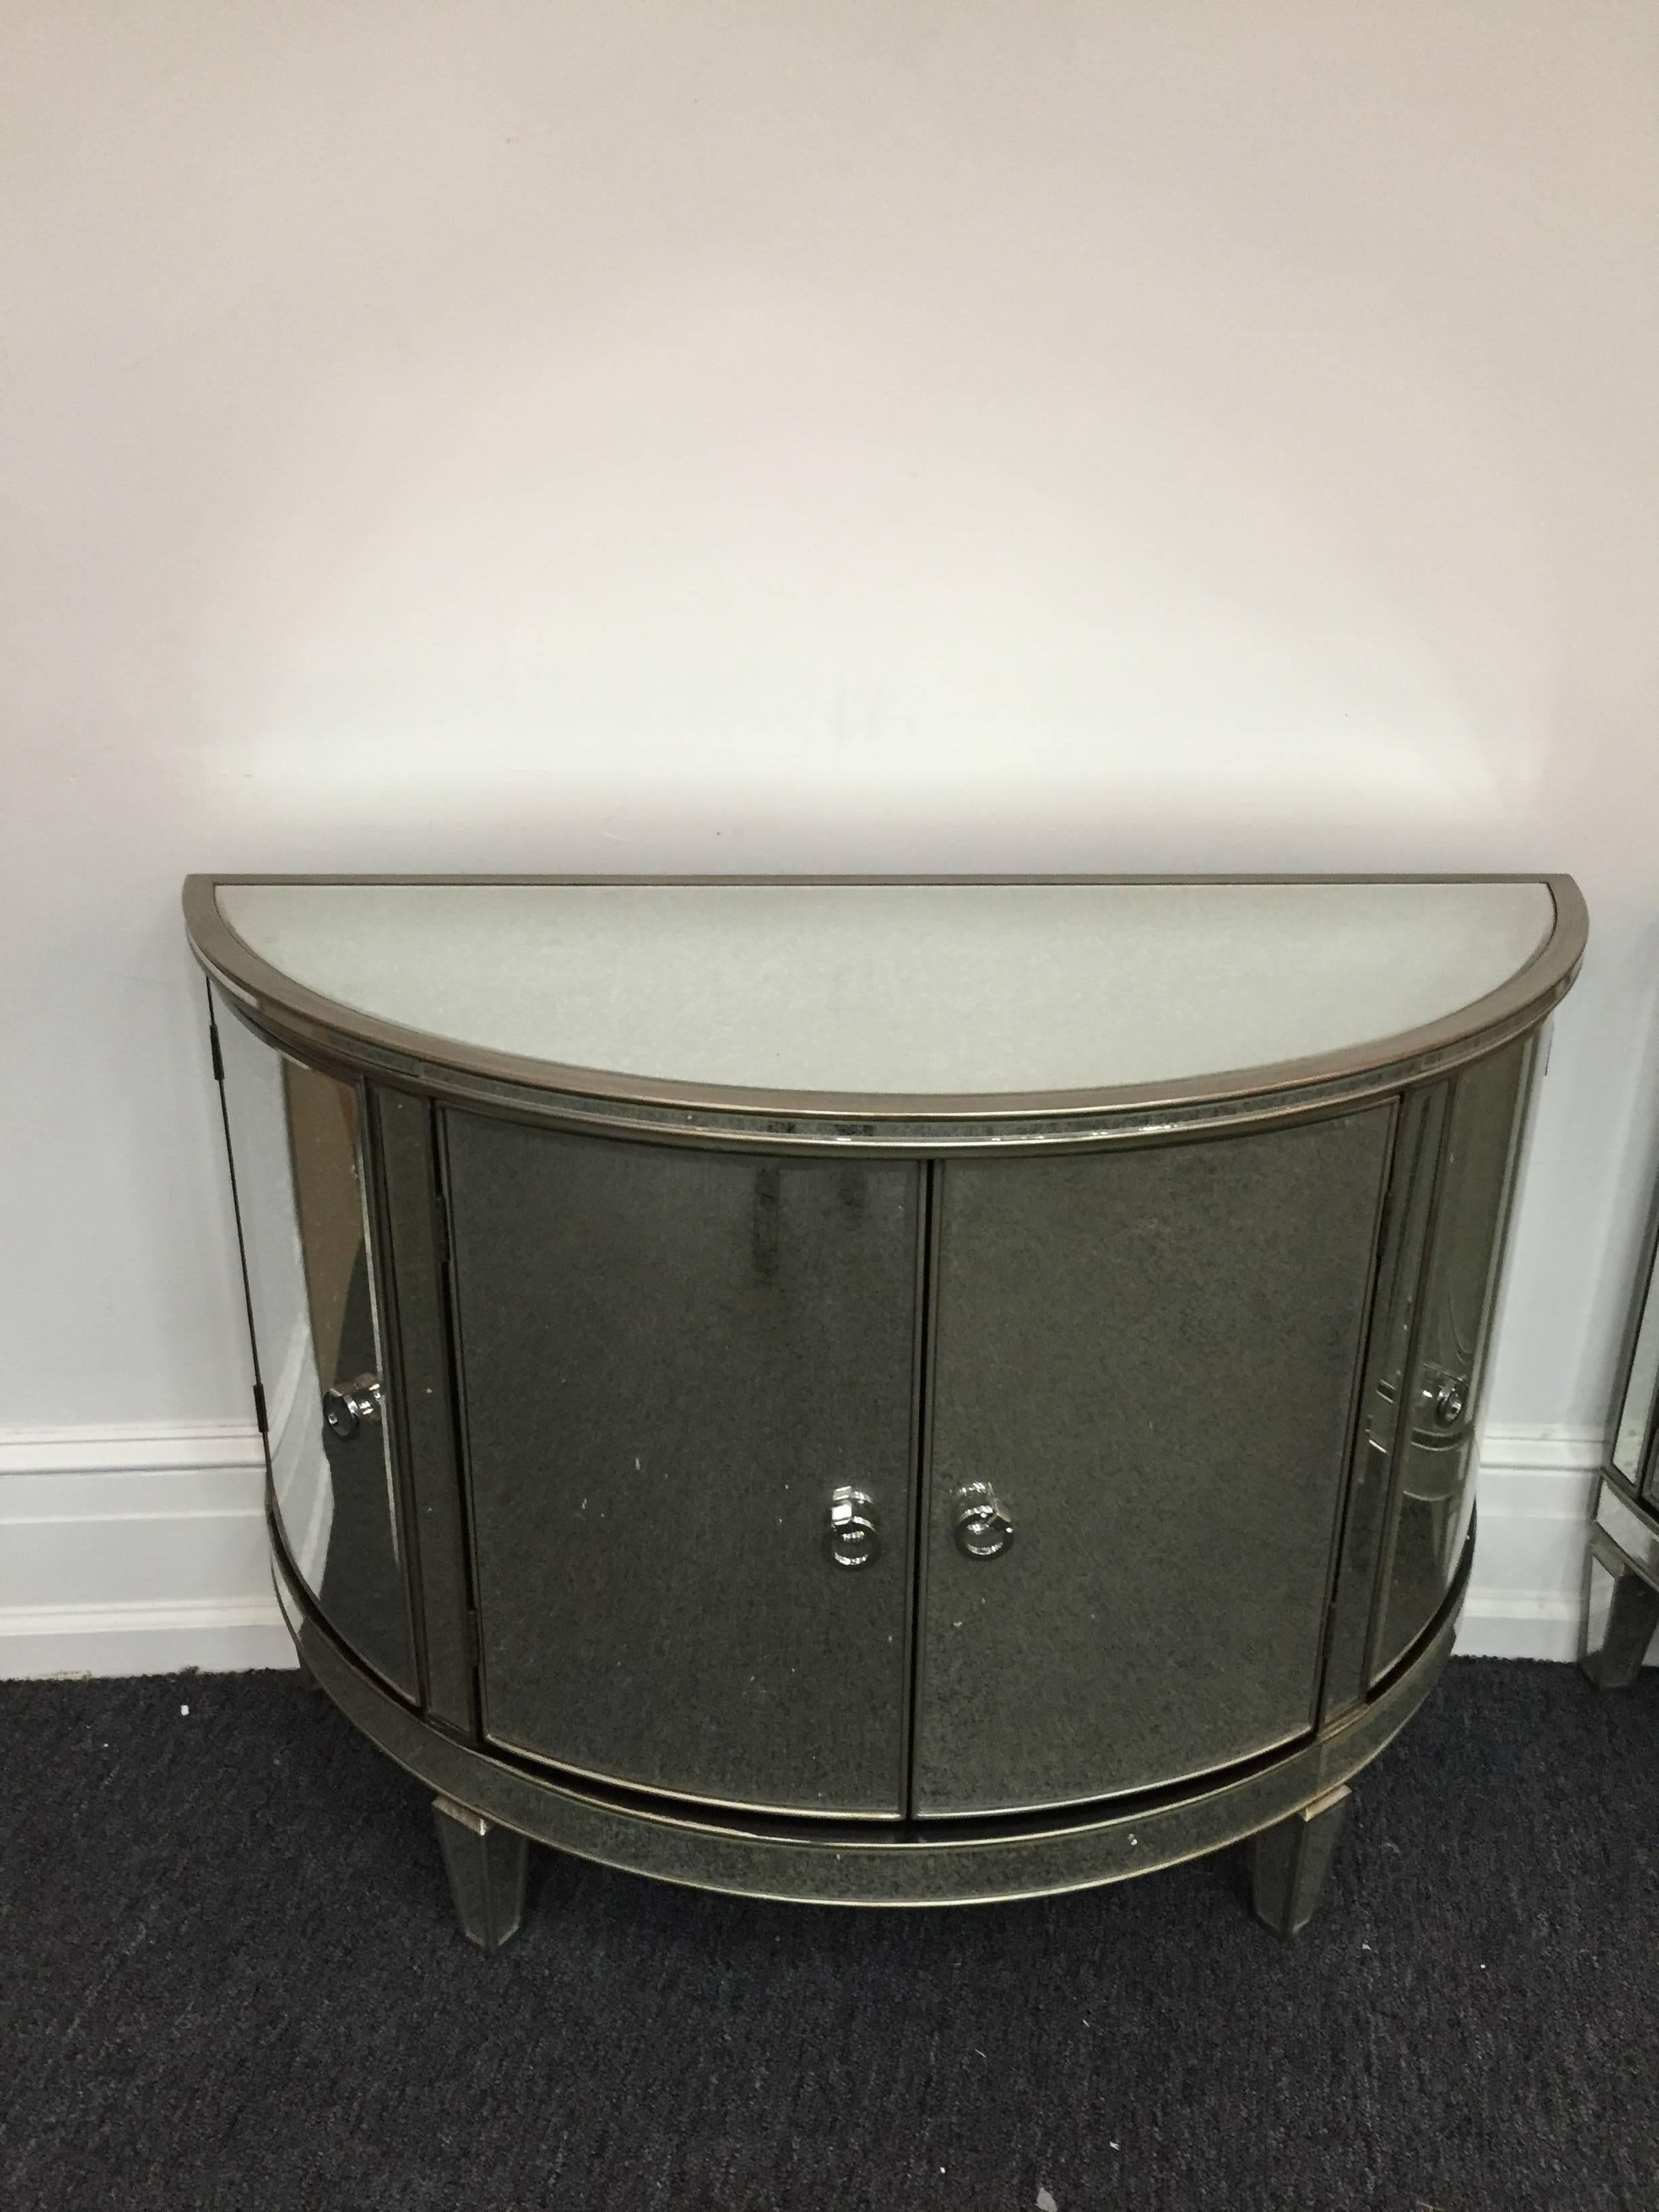 A pair of custom-made mirrored demilune mirrored commodes or chests with curved doors.